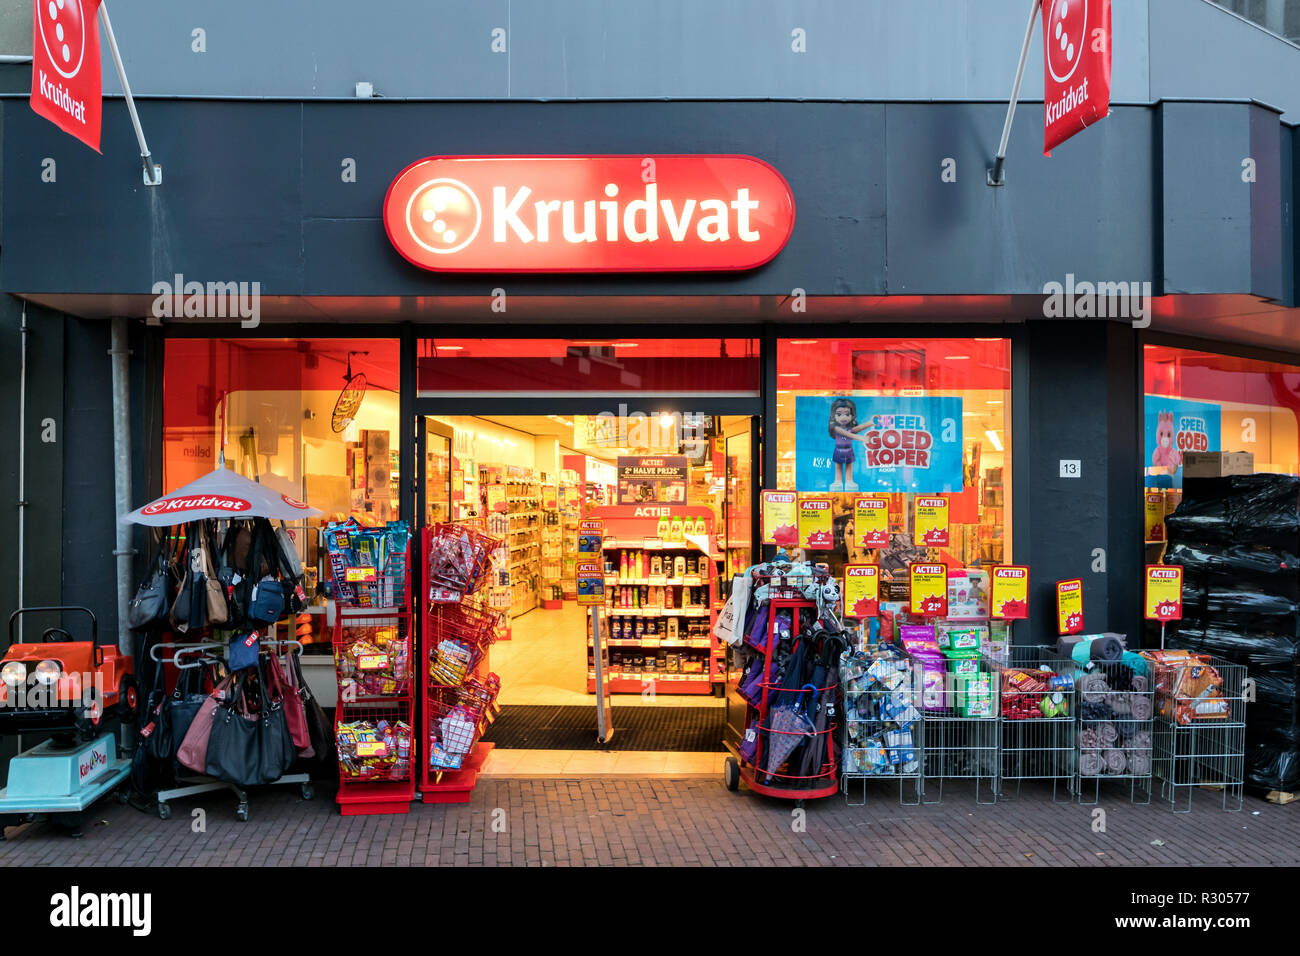 Kruidvat branch in Sneek, the Netherlands. Kruidvat is a Dutch retail,  pharmacy and drugstore chain specialised in health and beauty products  Stock Photo - Alamy